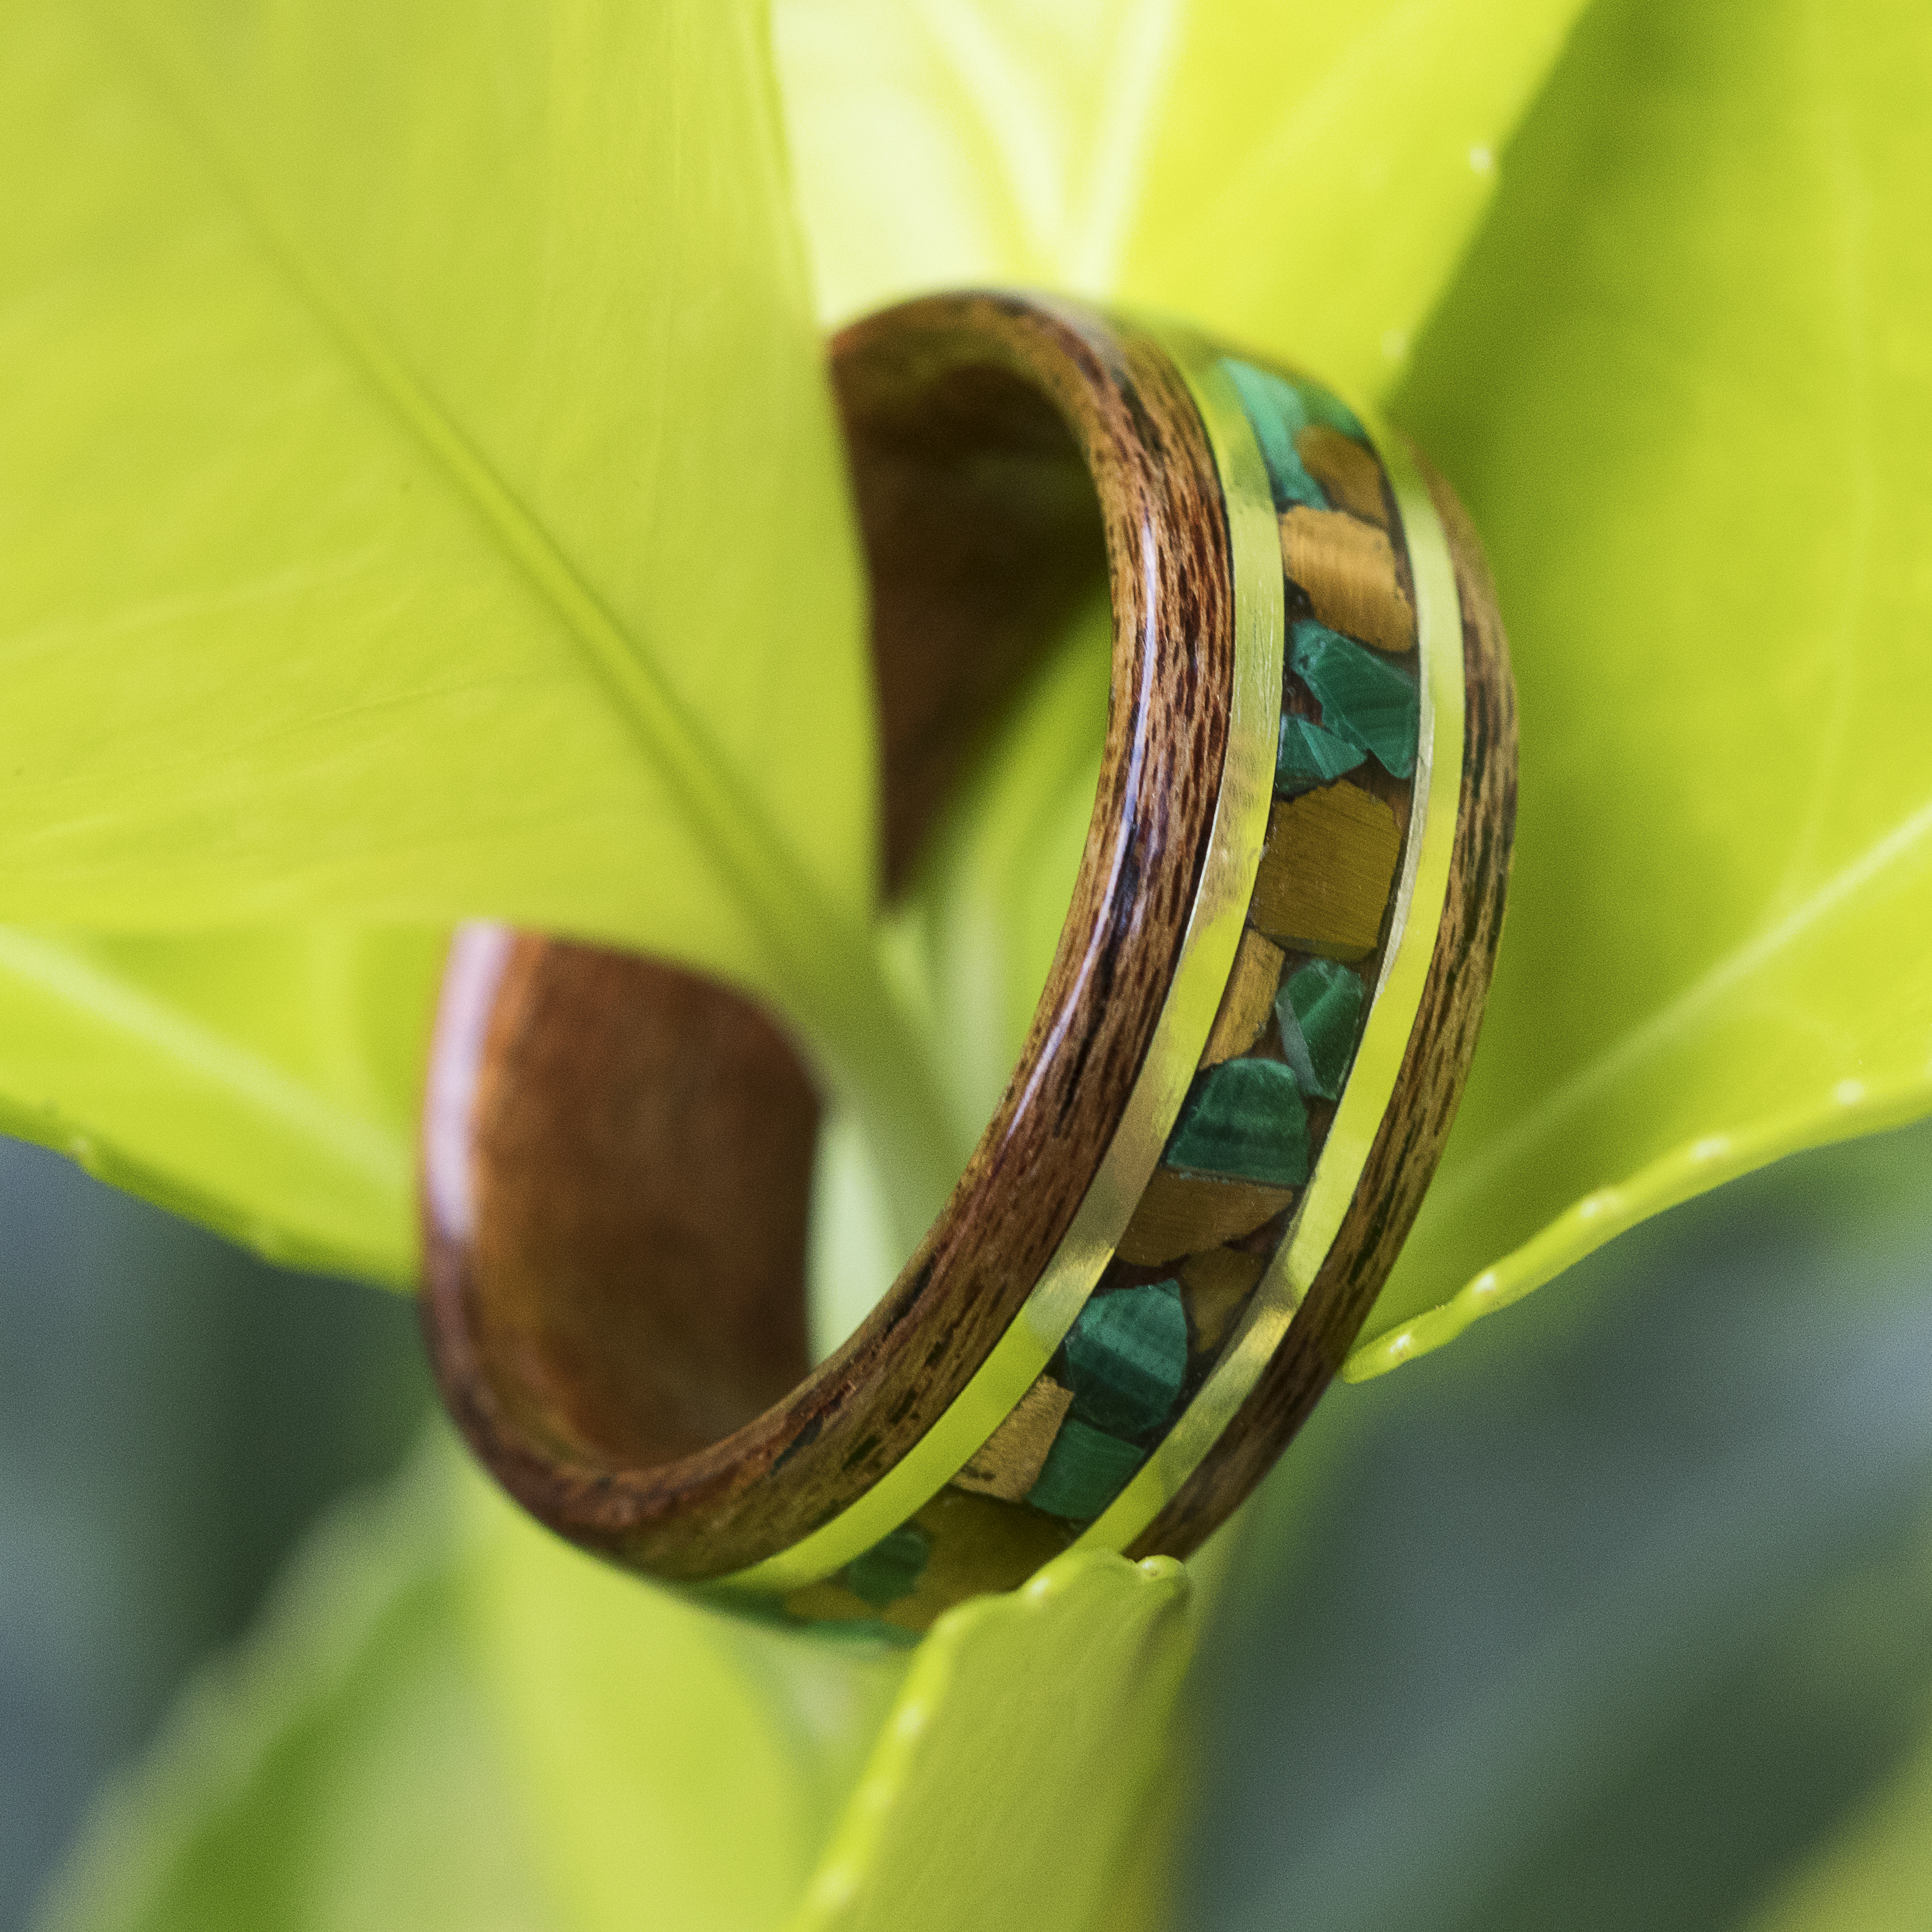 Mahogany Wood Ring Inlaid With Guitar String - Warren Rings